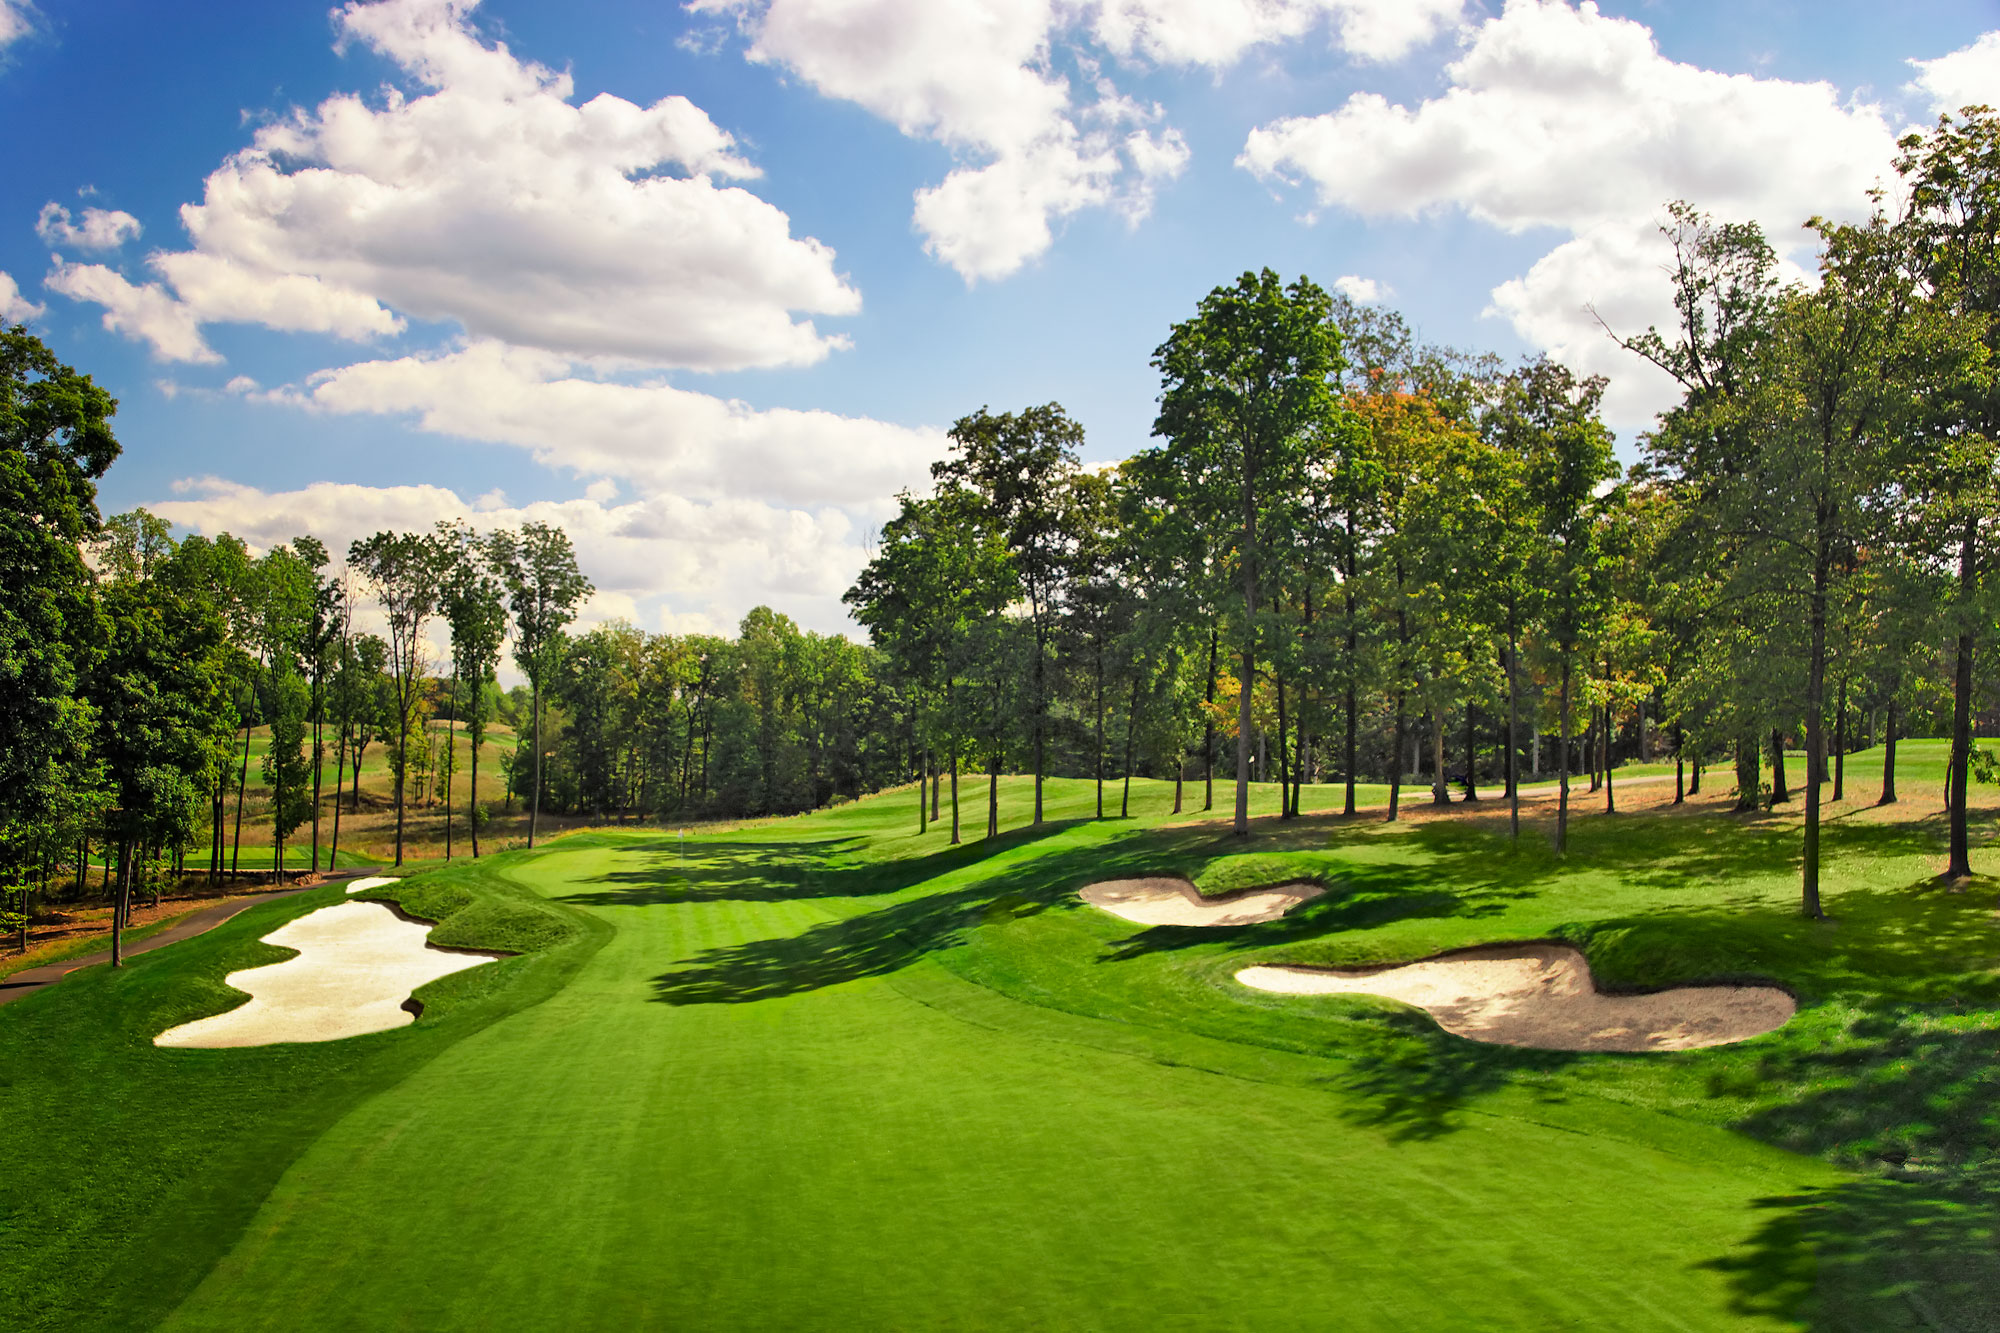 Experience Pure Golf at New Jersey National Golf Club in Basking Ridge, NJ